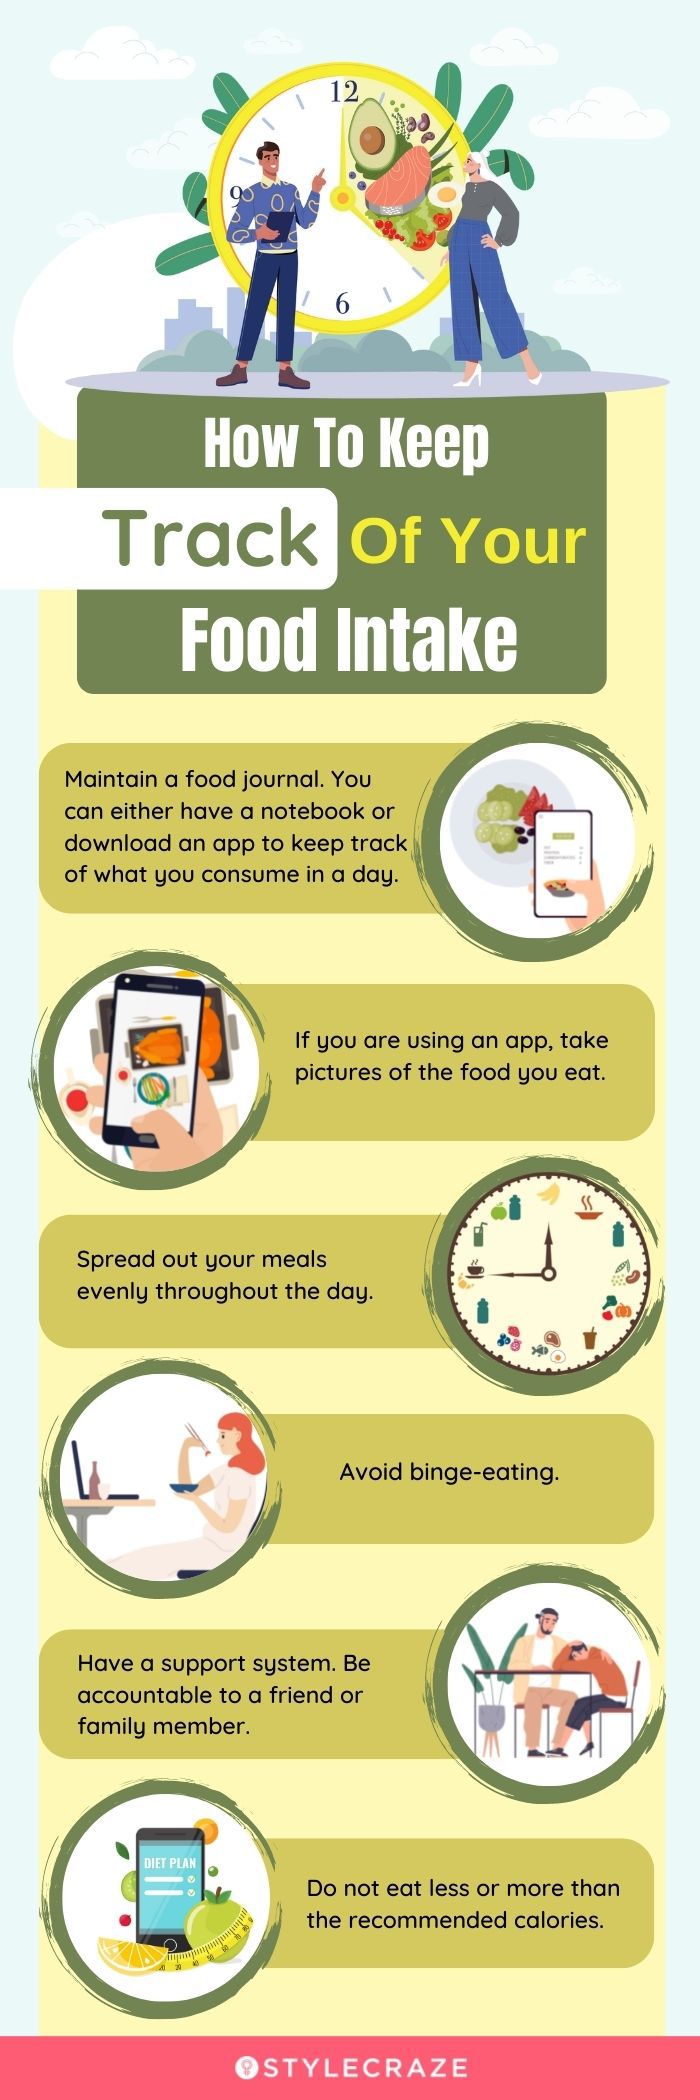 how to keep track of your food intake (infographic)